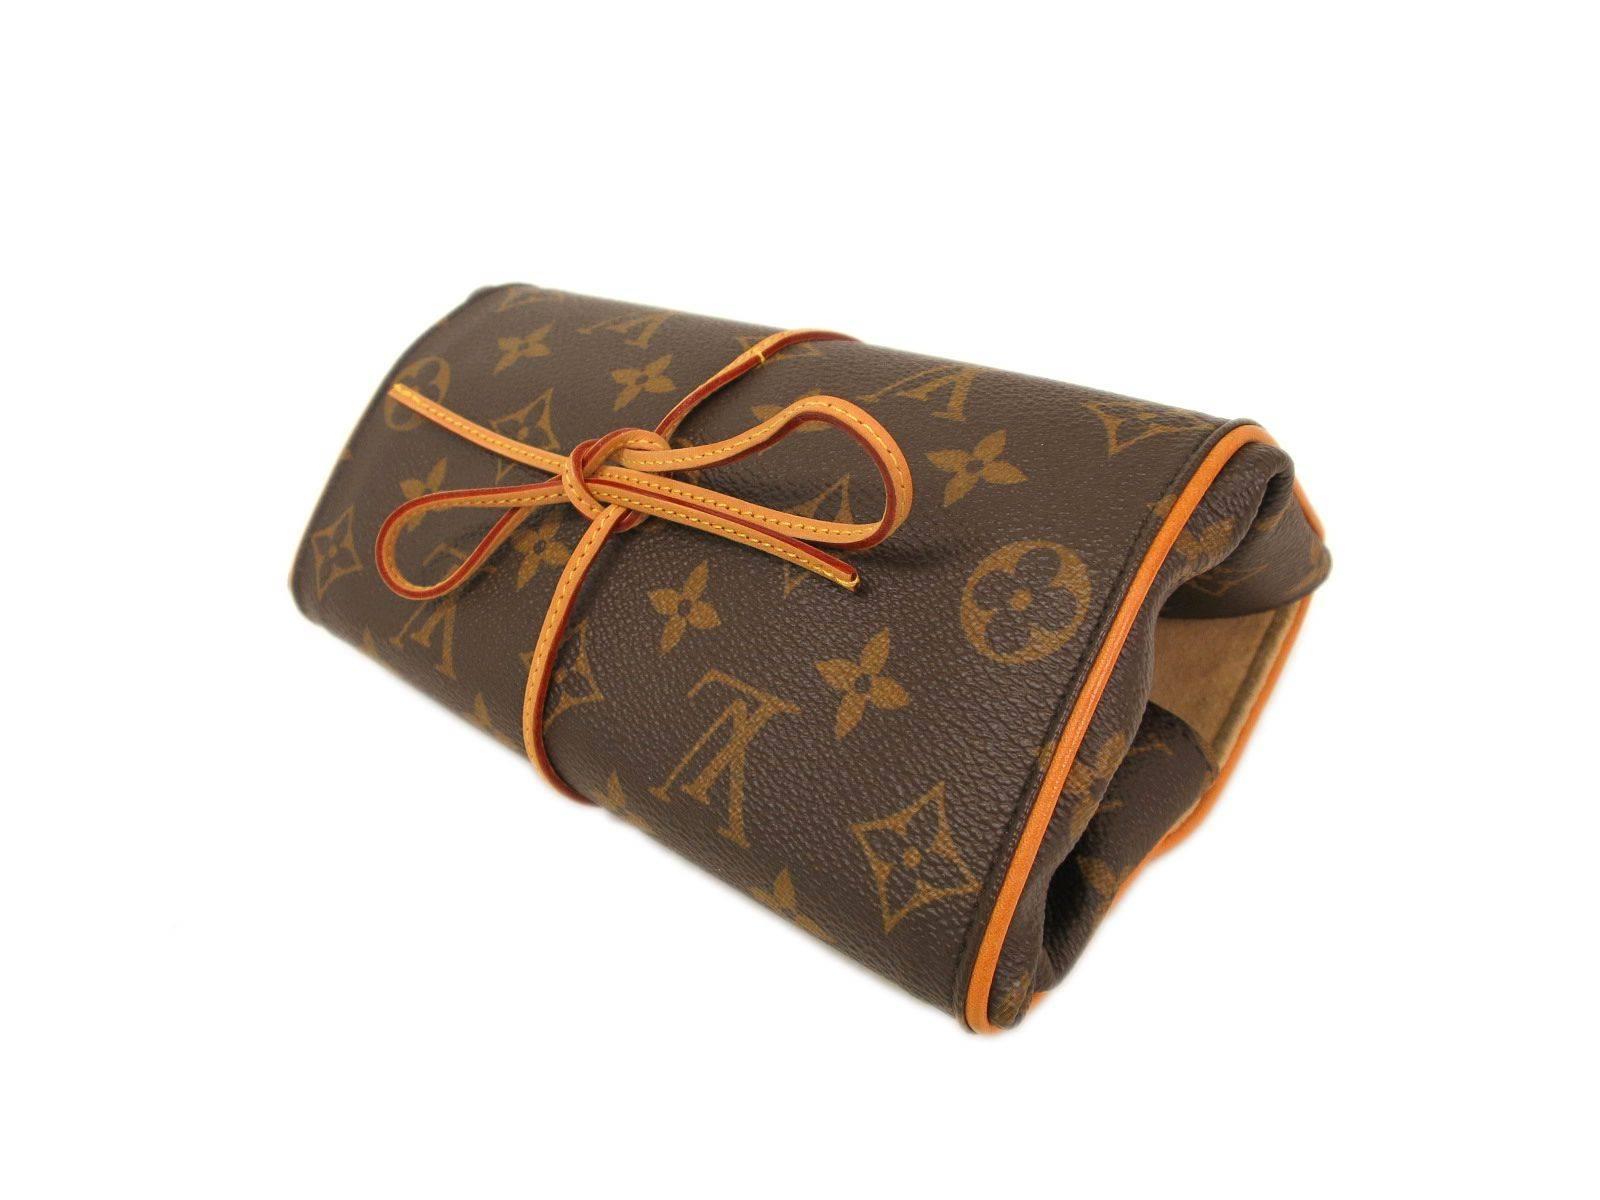 CURATOR'S NOTES

Roll it up and go with this beautiful Louis Vuitton jewelry roll accessory travel case.  Ideal for the jet-setter or corporate traveler who stays on the go.  

Monogram coated canvas
Made in France
Date code SN2039
Measures